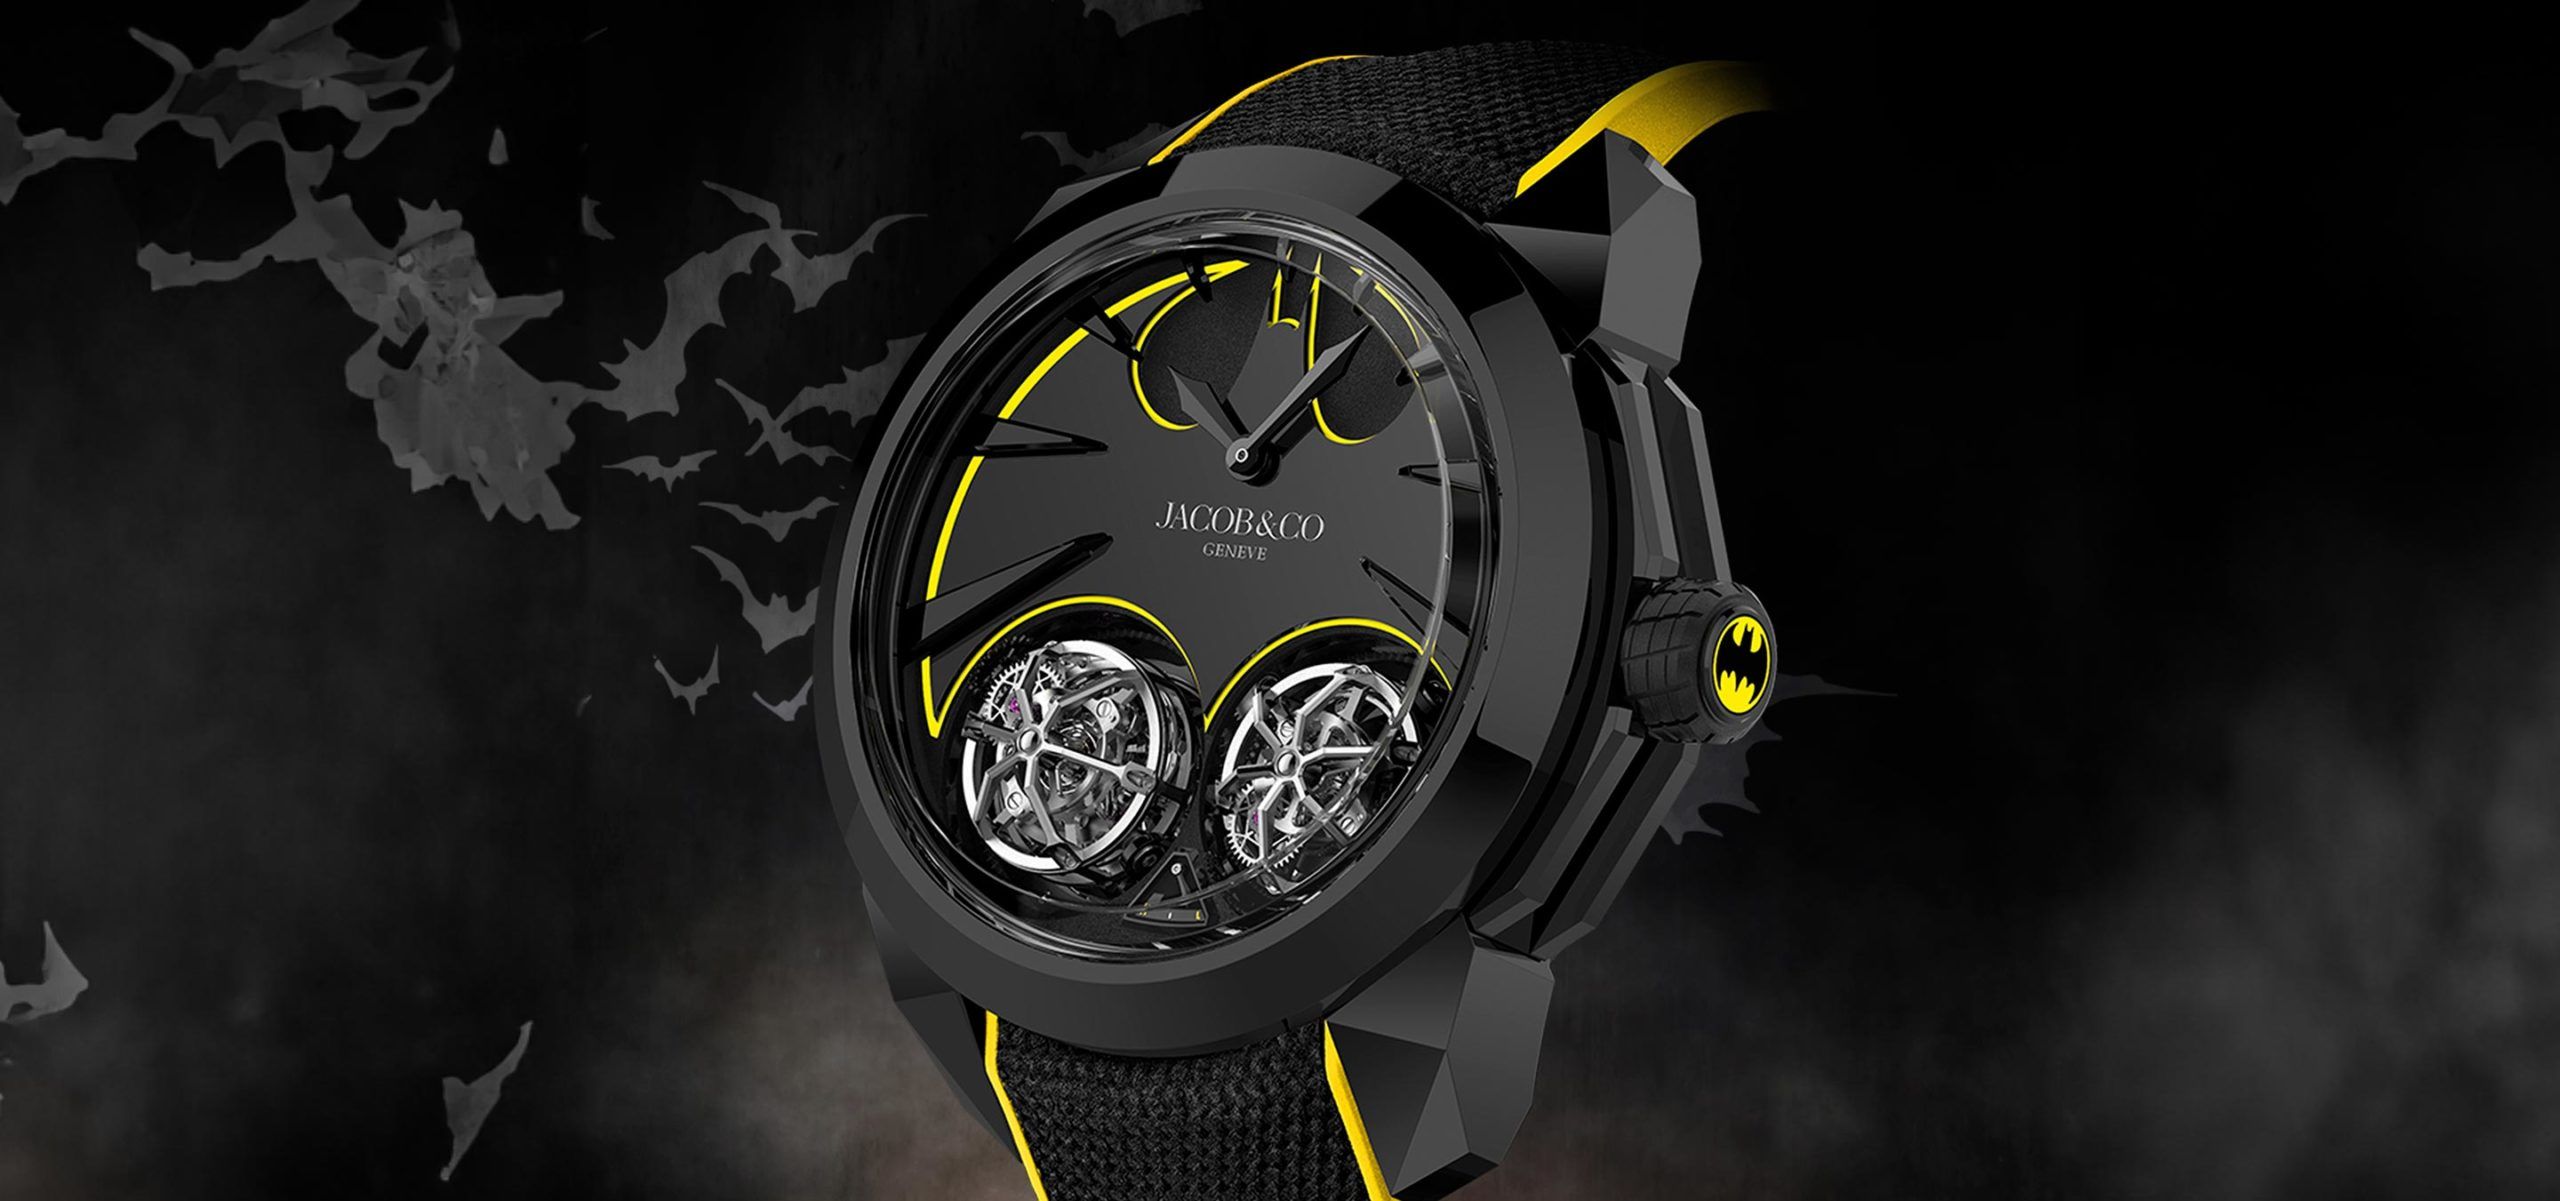 The Dark Knight’s Newest Ally: Introducing The Jacob & Co Gotham City Limited-Edition